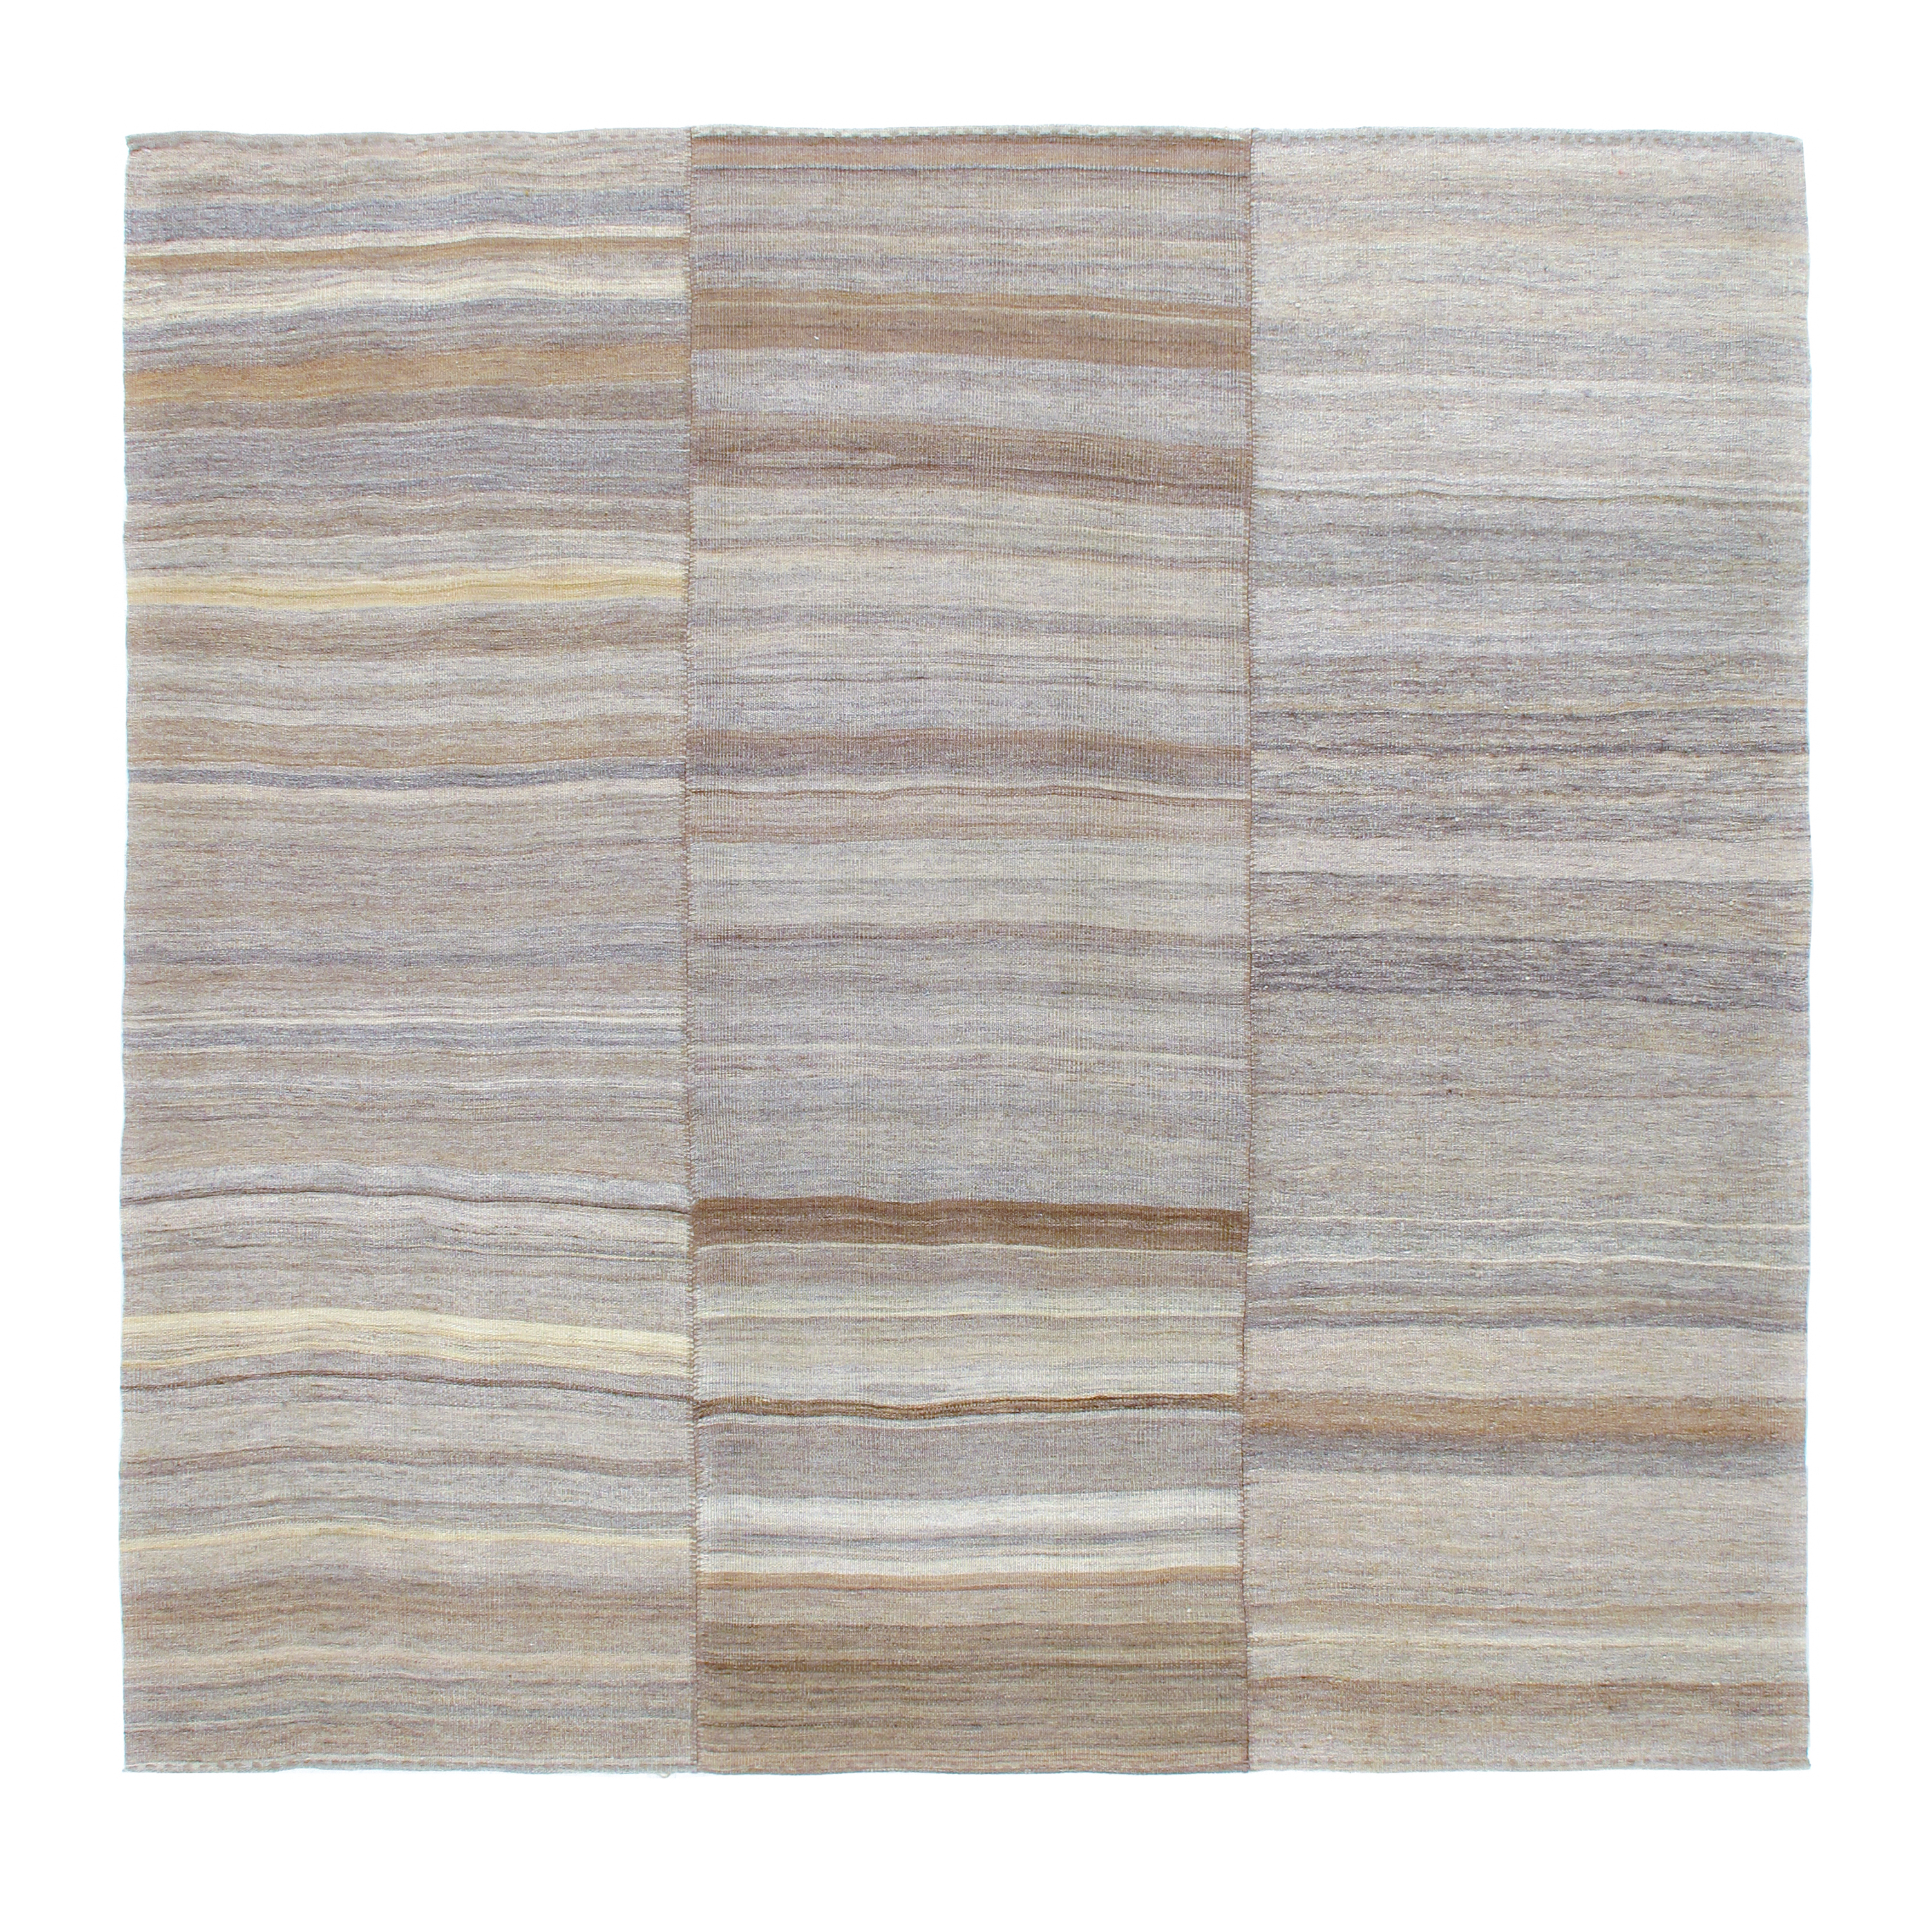 This Shiraz flatweave rug is made of 100% wool.